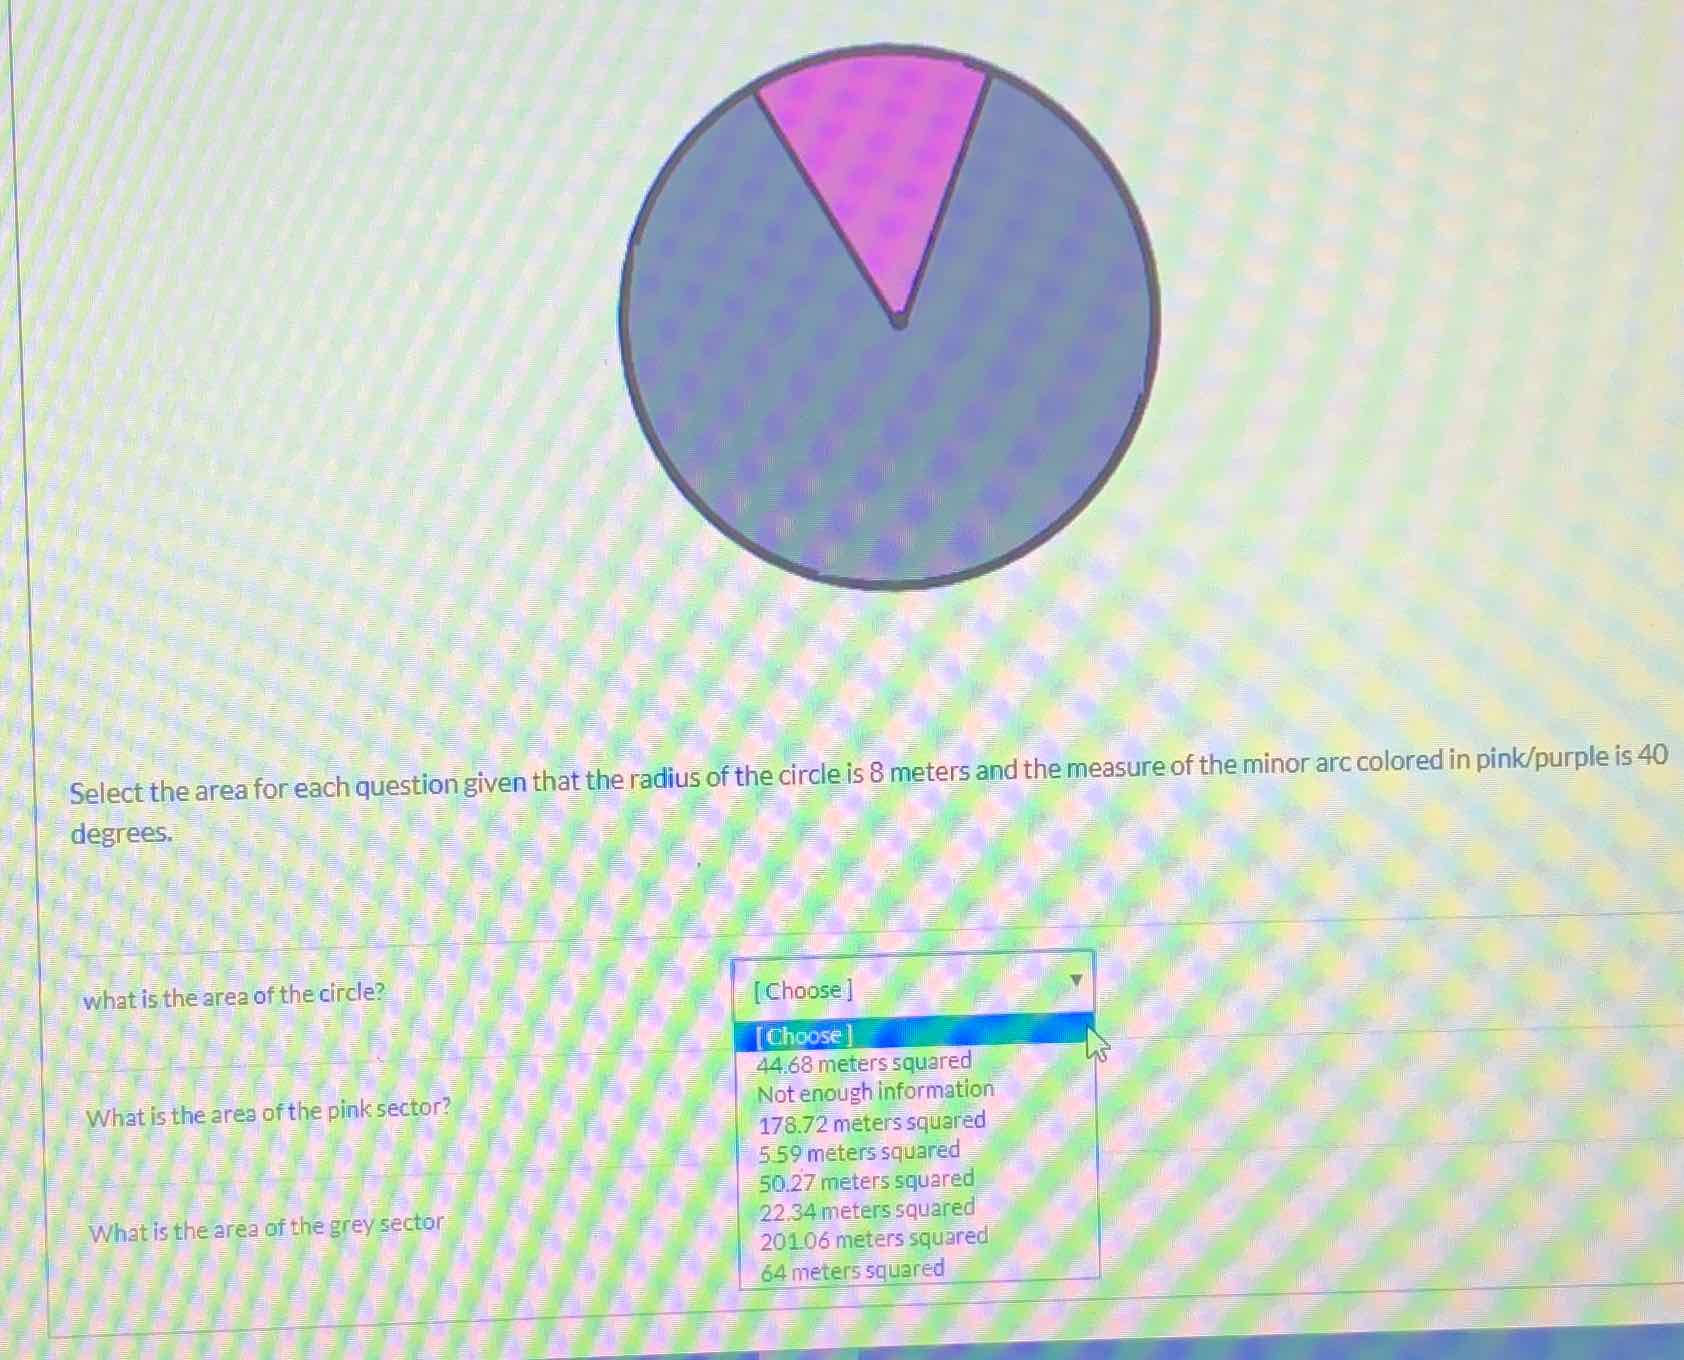 Select the area for each question given that the radius of the circle is 8 meters and the measure of the minor arc colored in pink/purple is 40 degrees.
what is the area of the circle?
What is the ares of the pink sector?
What is the area of the grey sector
\begin{tabular}{|l|} 
[Choose] \\
[Choose] \\
\( 44.68 \) meters squared \\
Not enough information \\
\( 178.72 \) meters squared \\
559 meters squared \\
\( 50.27 \) meters squared \\
\( 22.34 \) meters squared \\
\( 201.06 \) meters squared \\
64 meters squared
\end{tabular}